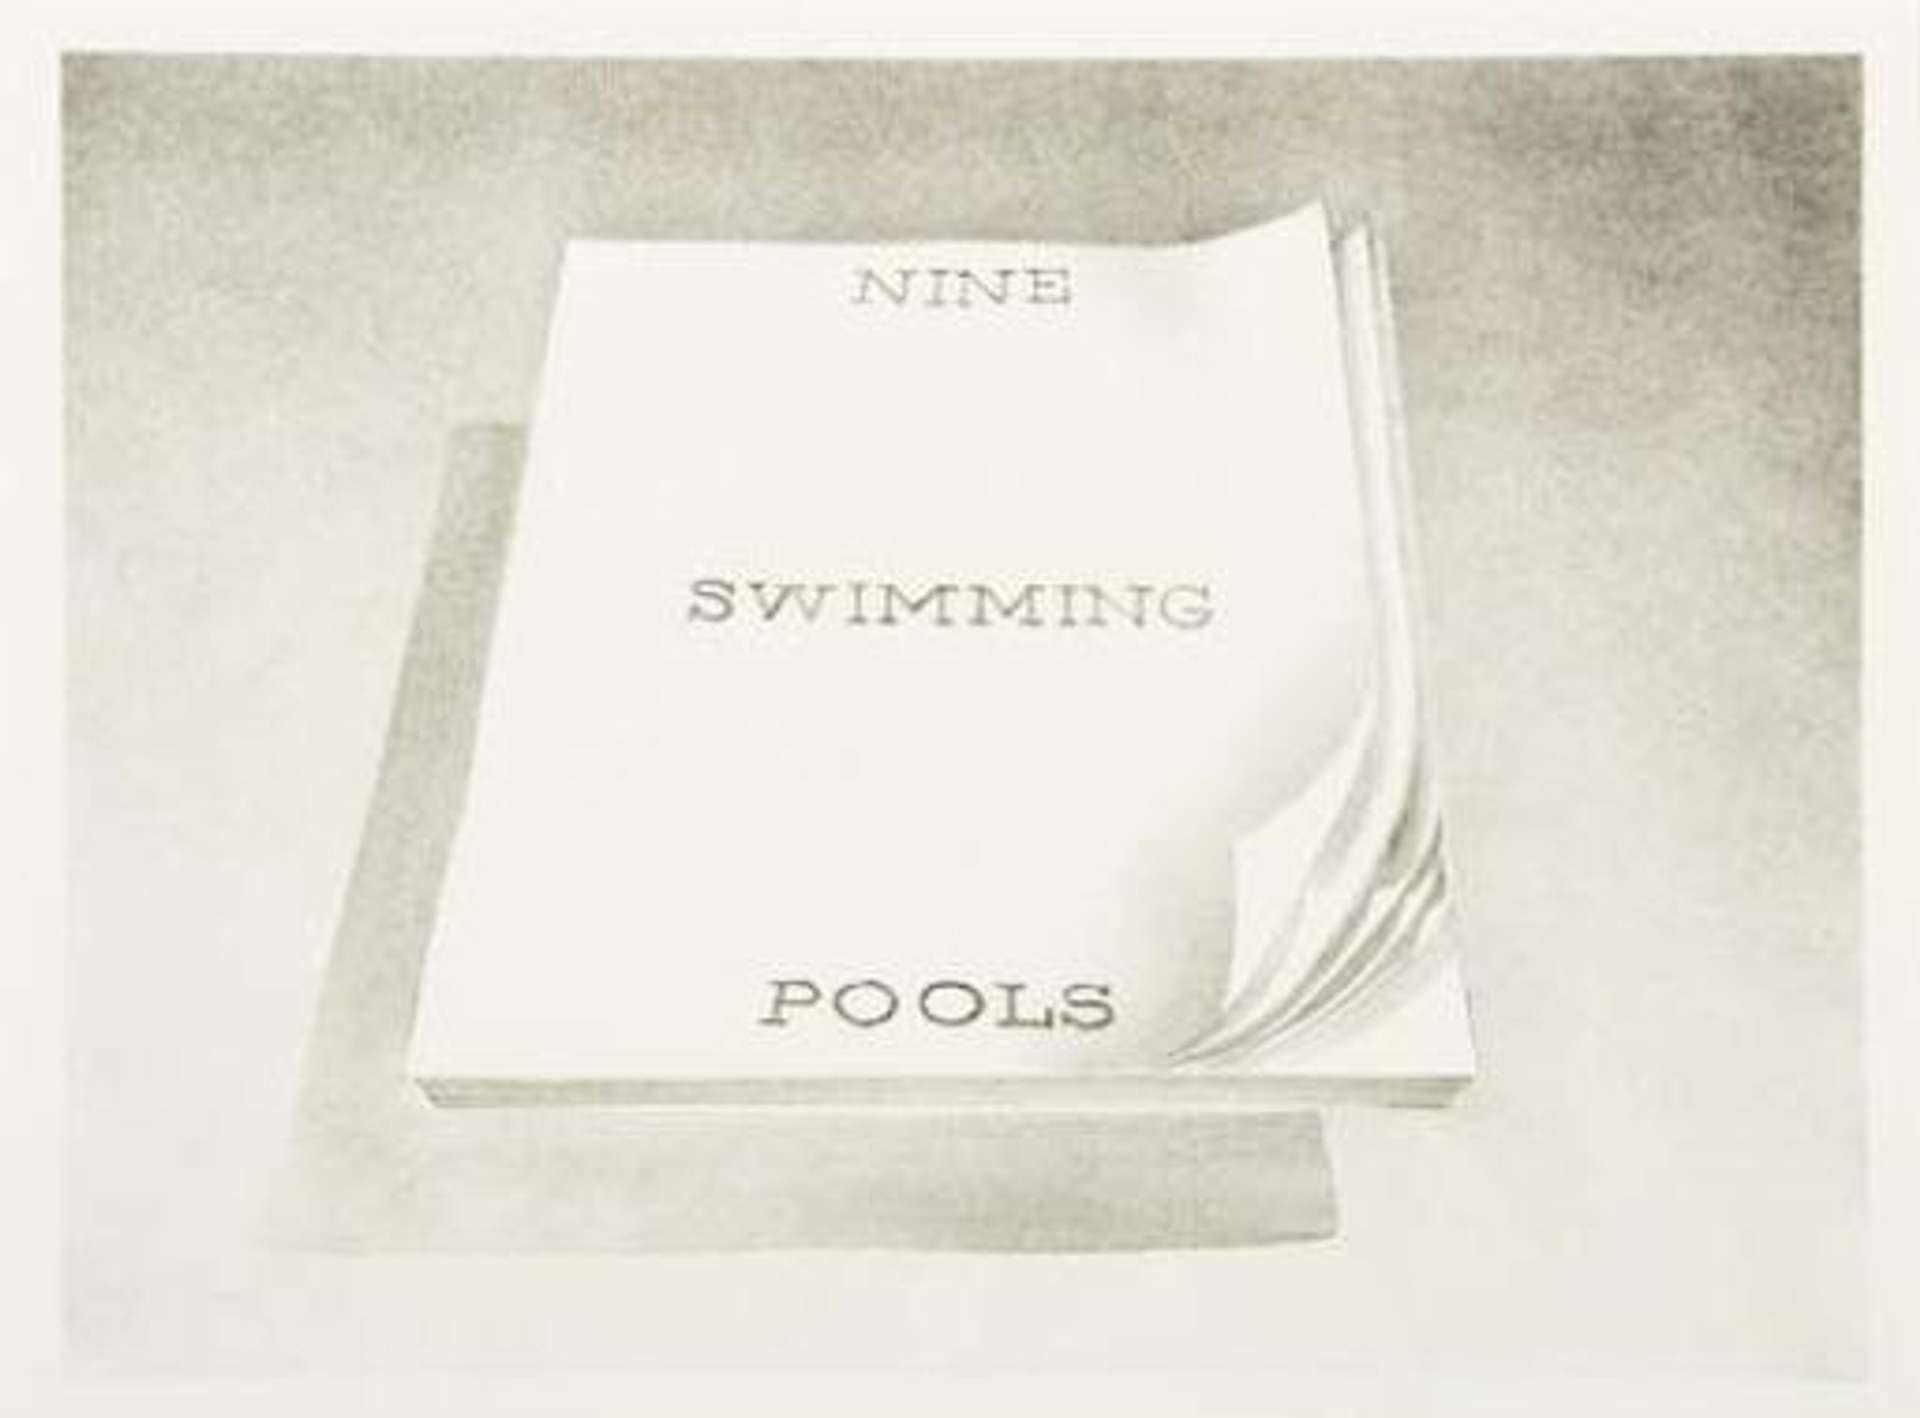 Nine Swimming Pools, Book Cover - Signed Print by Ed Ruscha 1970 - MyArtBroker